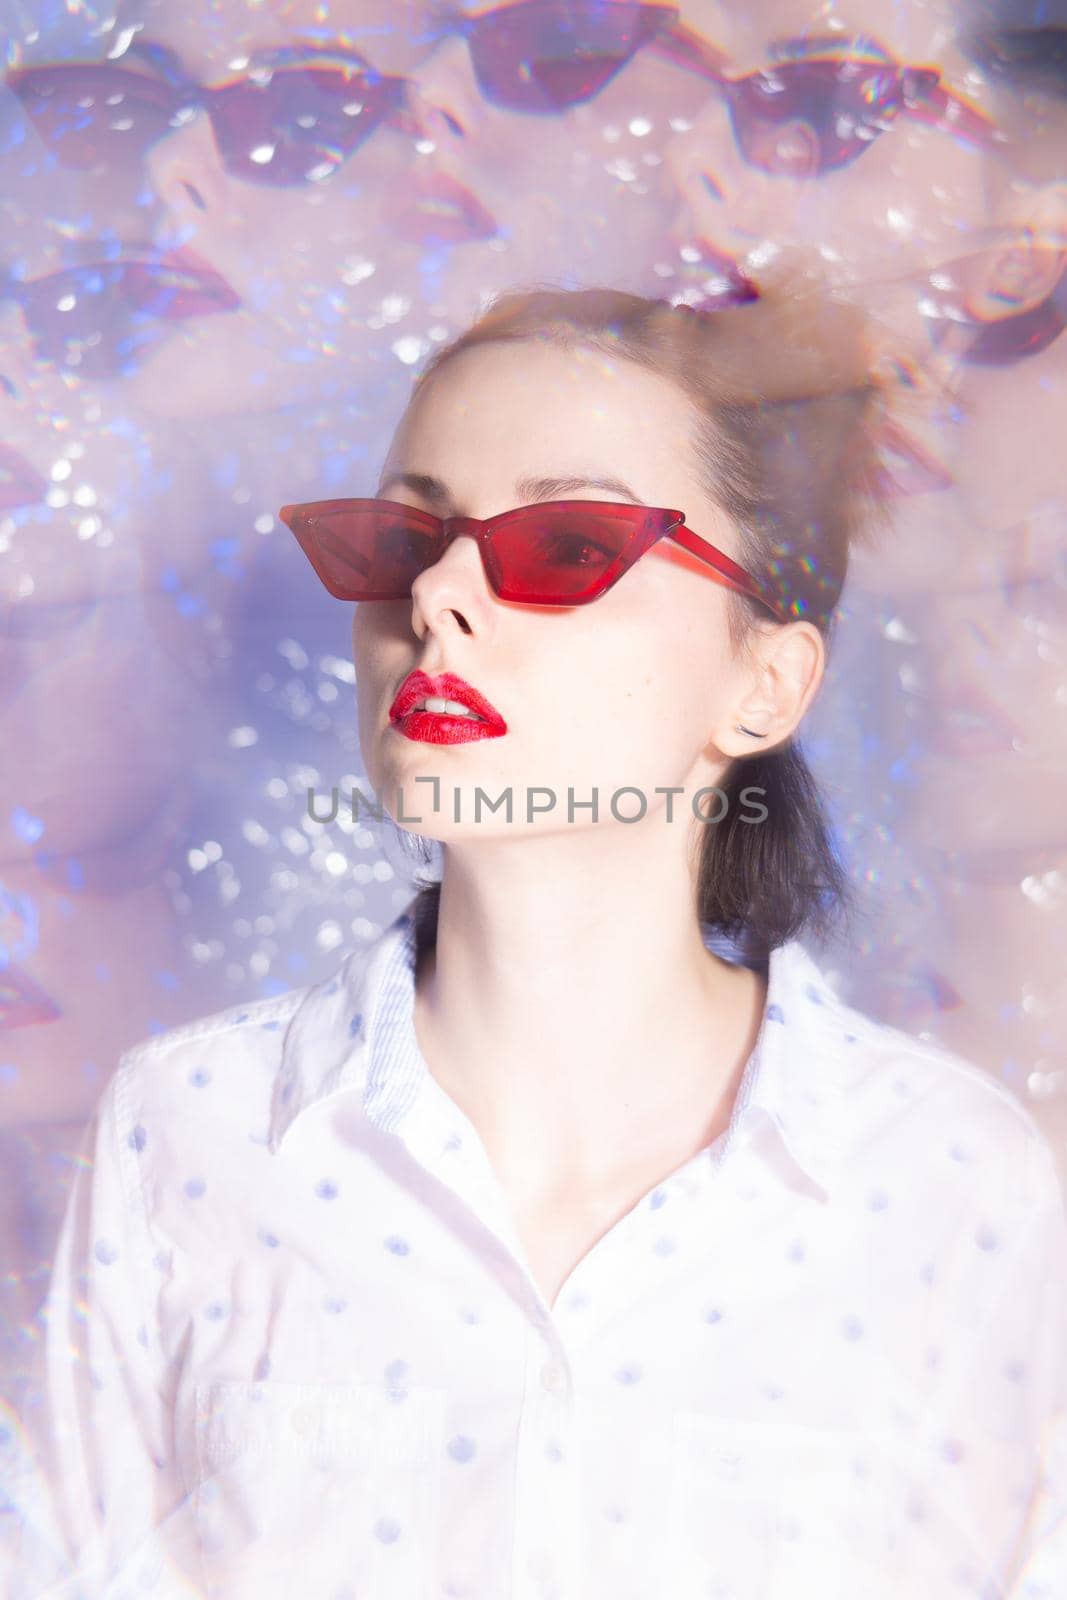 art portrait of a woman in green glasses with red lipstick on her lips in a white shirt by shilovskaya